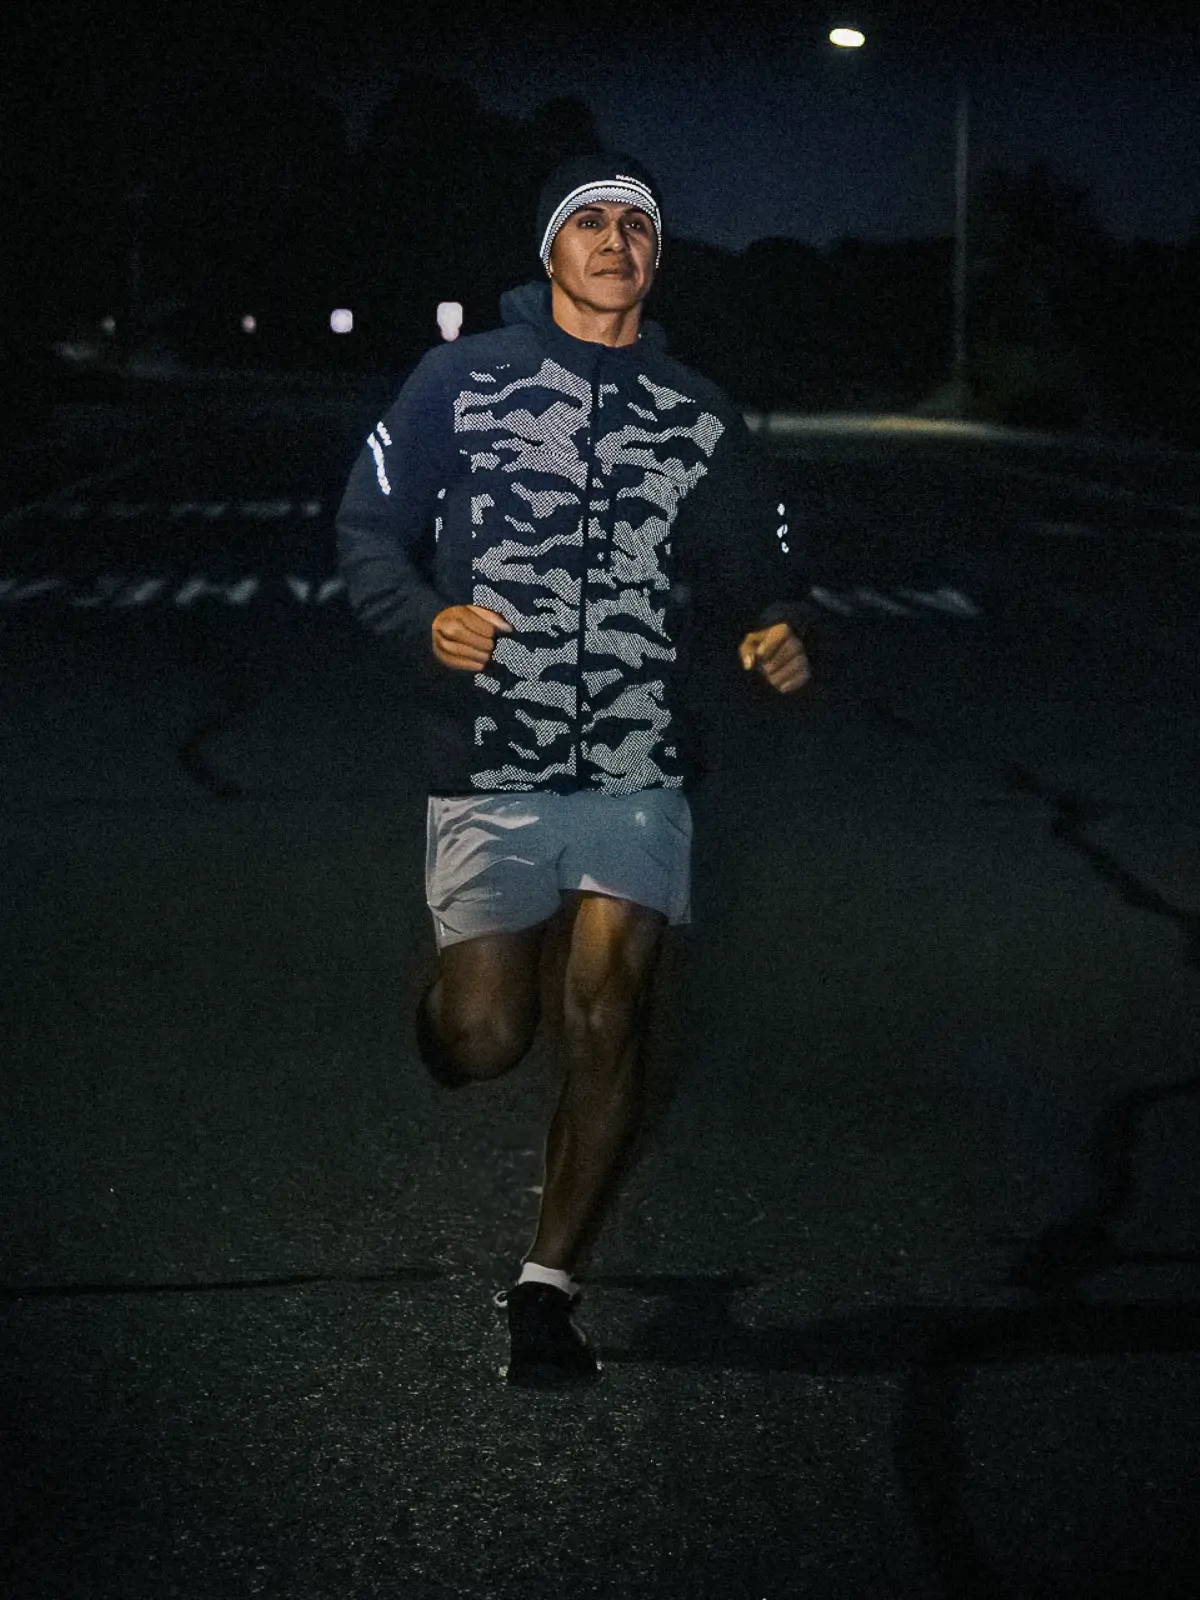 Male runner running down the street at night wearing a Nathan HyperNight Stealth Jacket which shows off the reflectivity of the jacket